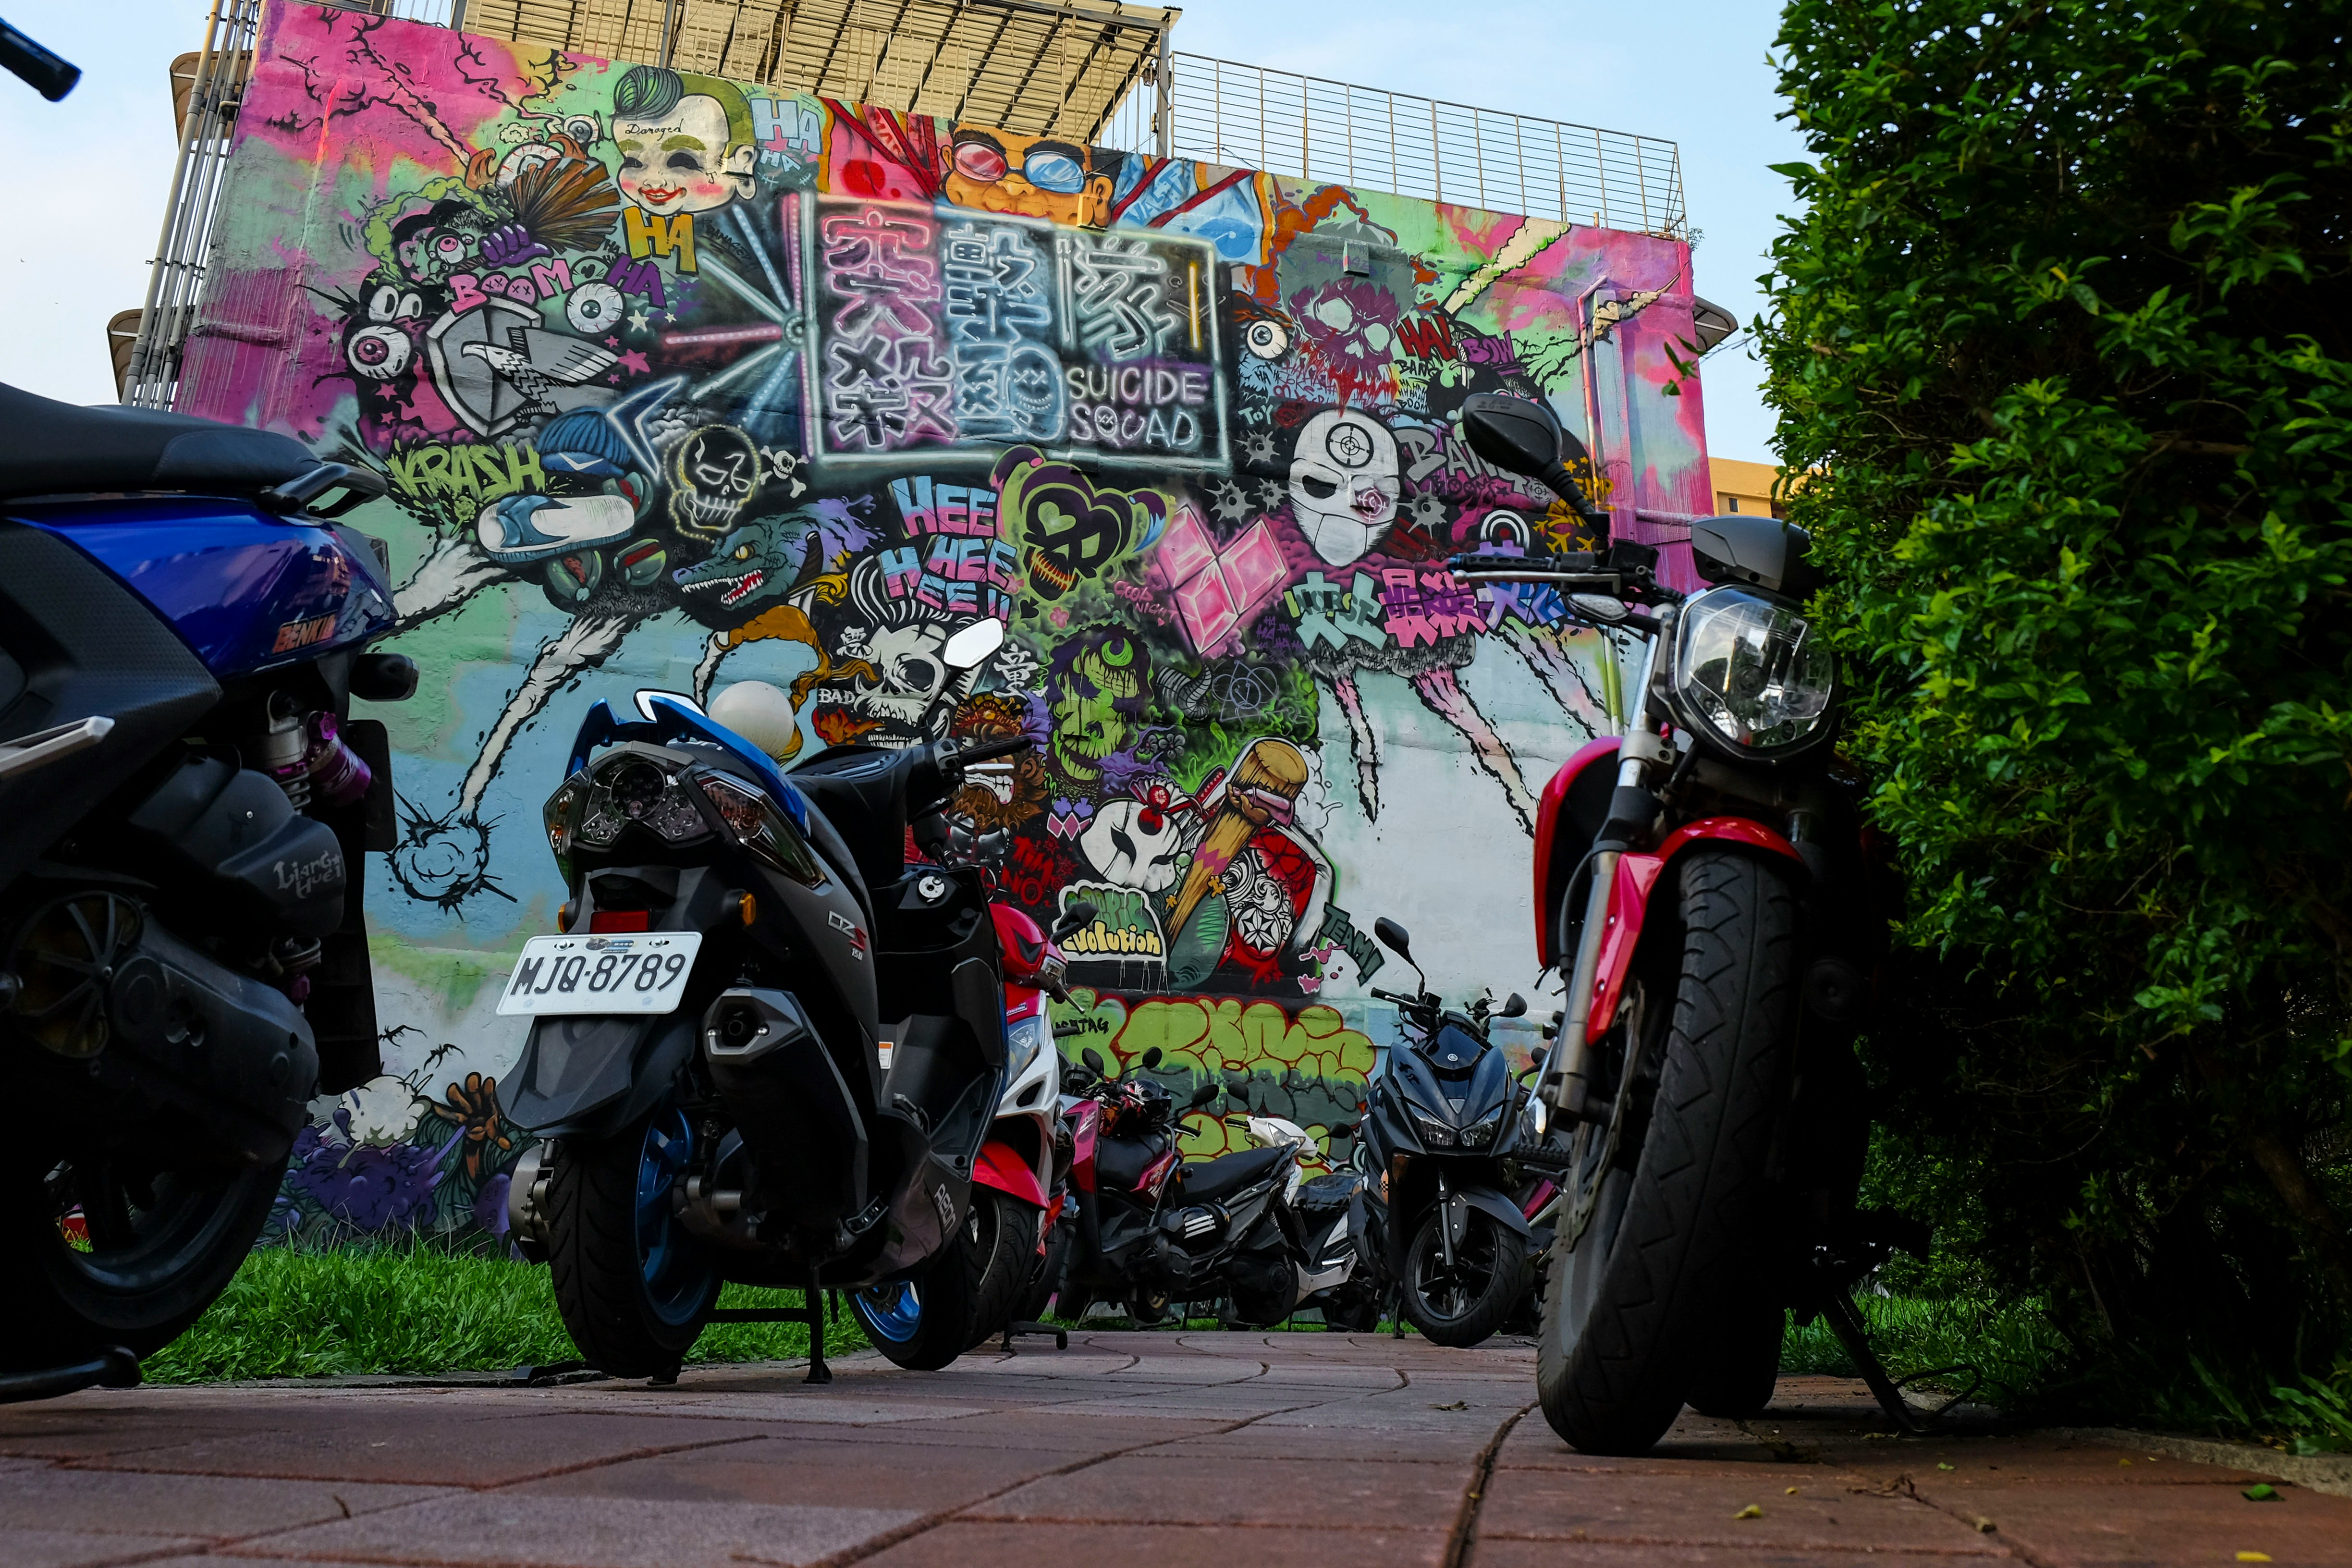 assorted-color motorcycles parking near wall wit graffiti art